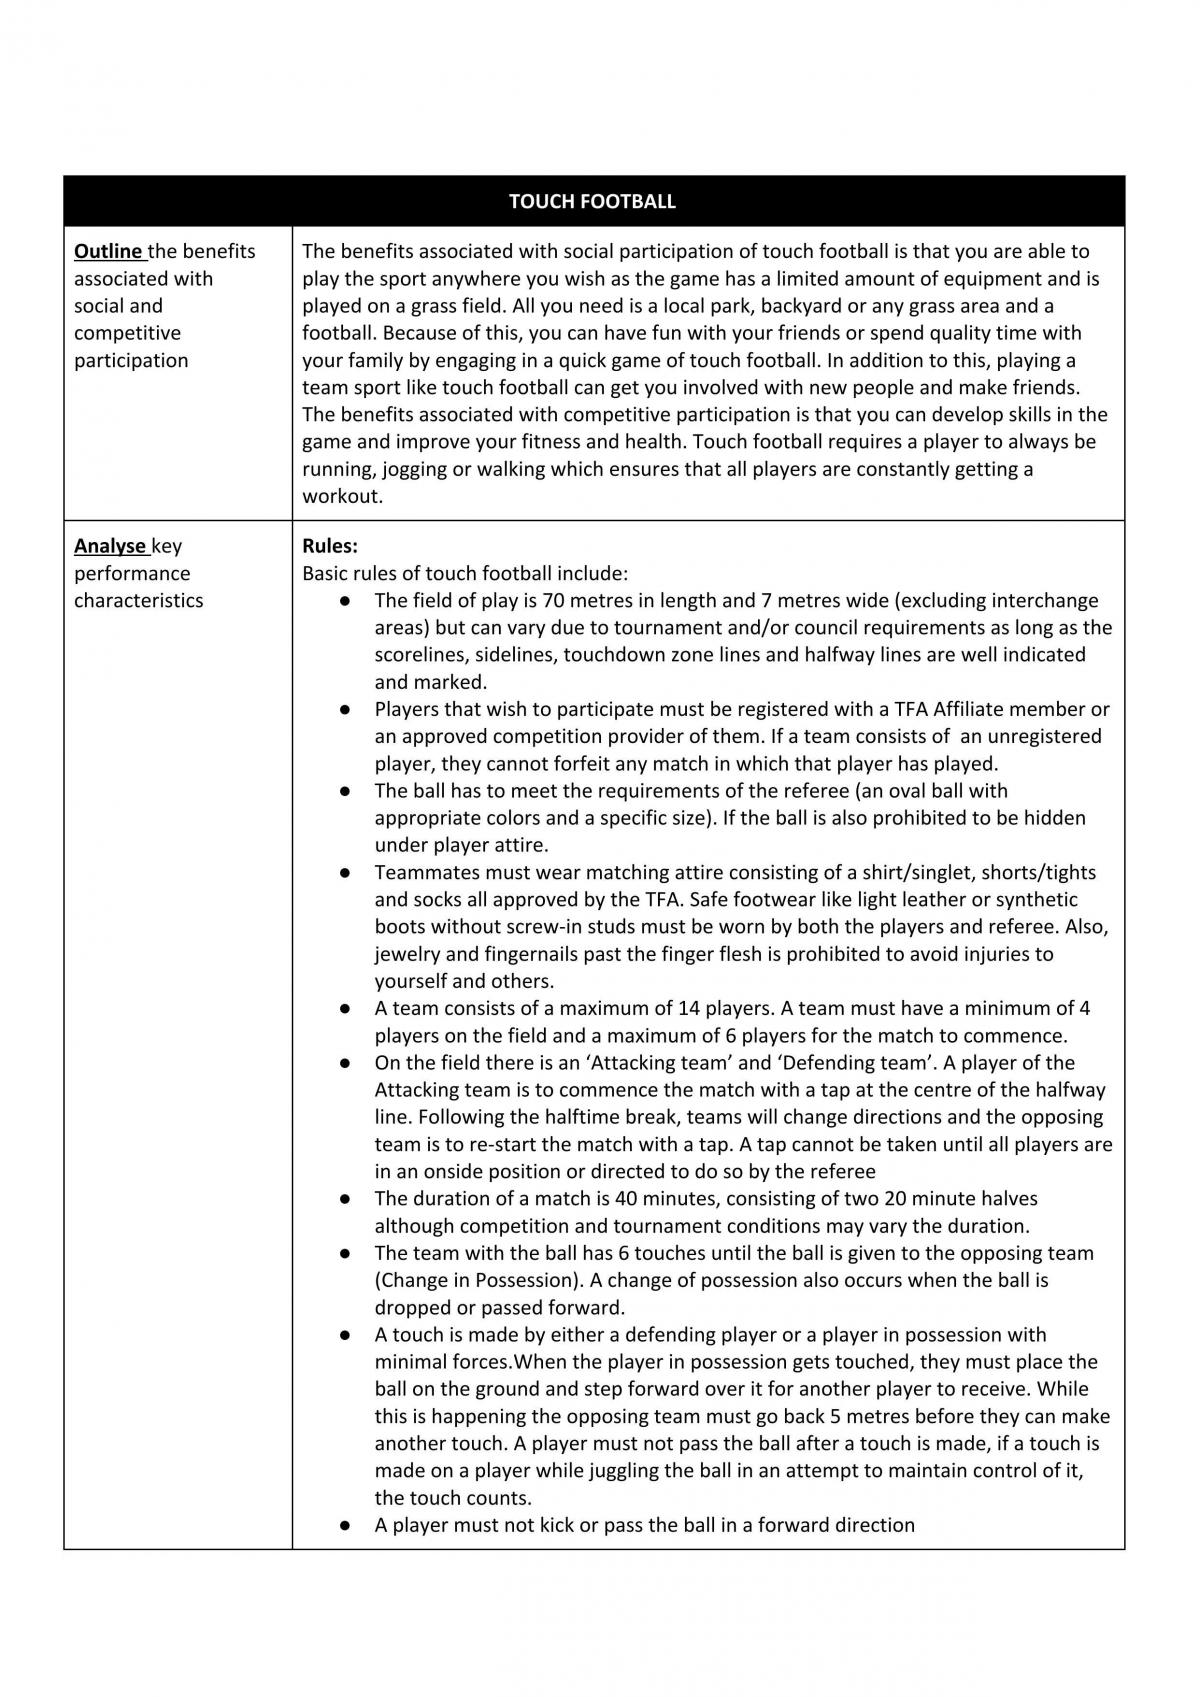 PDHPE/ SLR Assessment Task- Coaching - Page 1